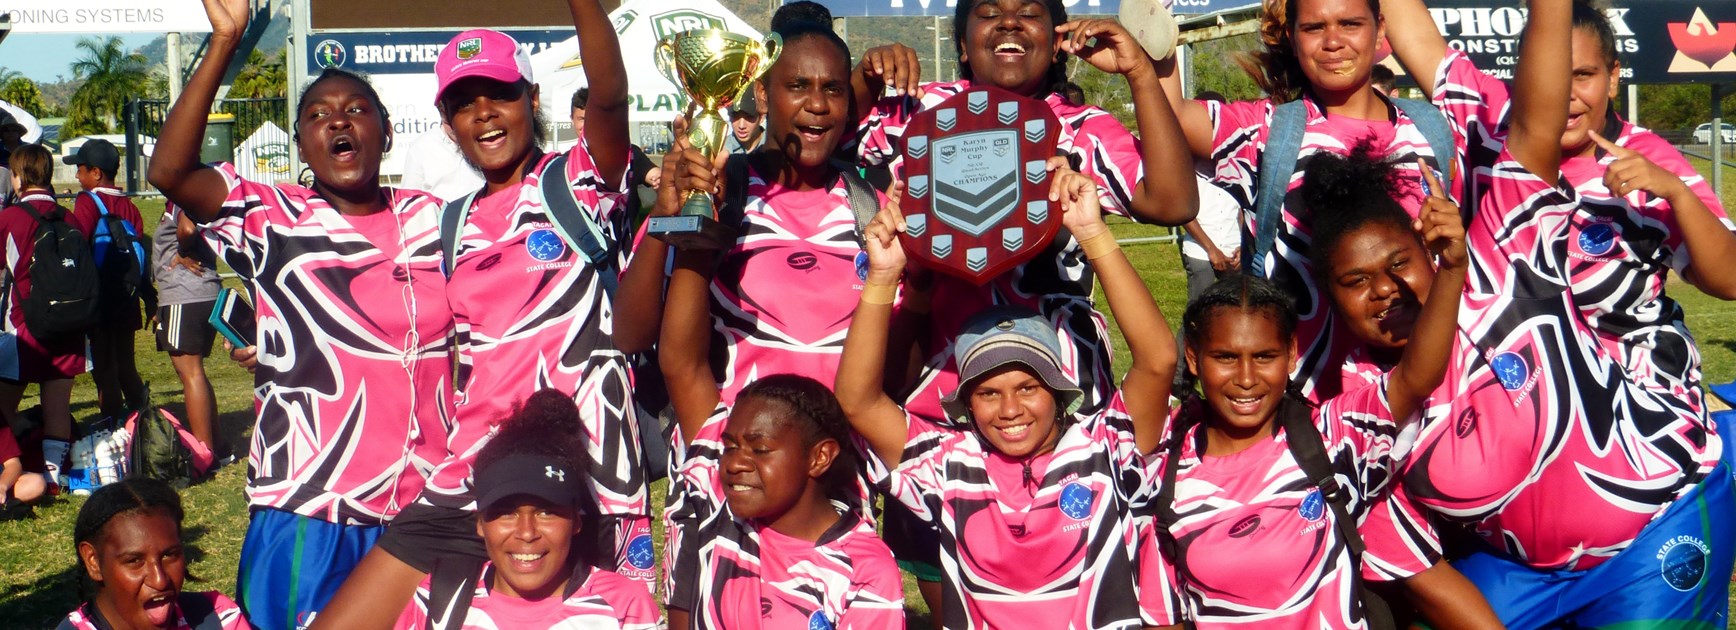 Epic journey a breeze for Tagai girls